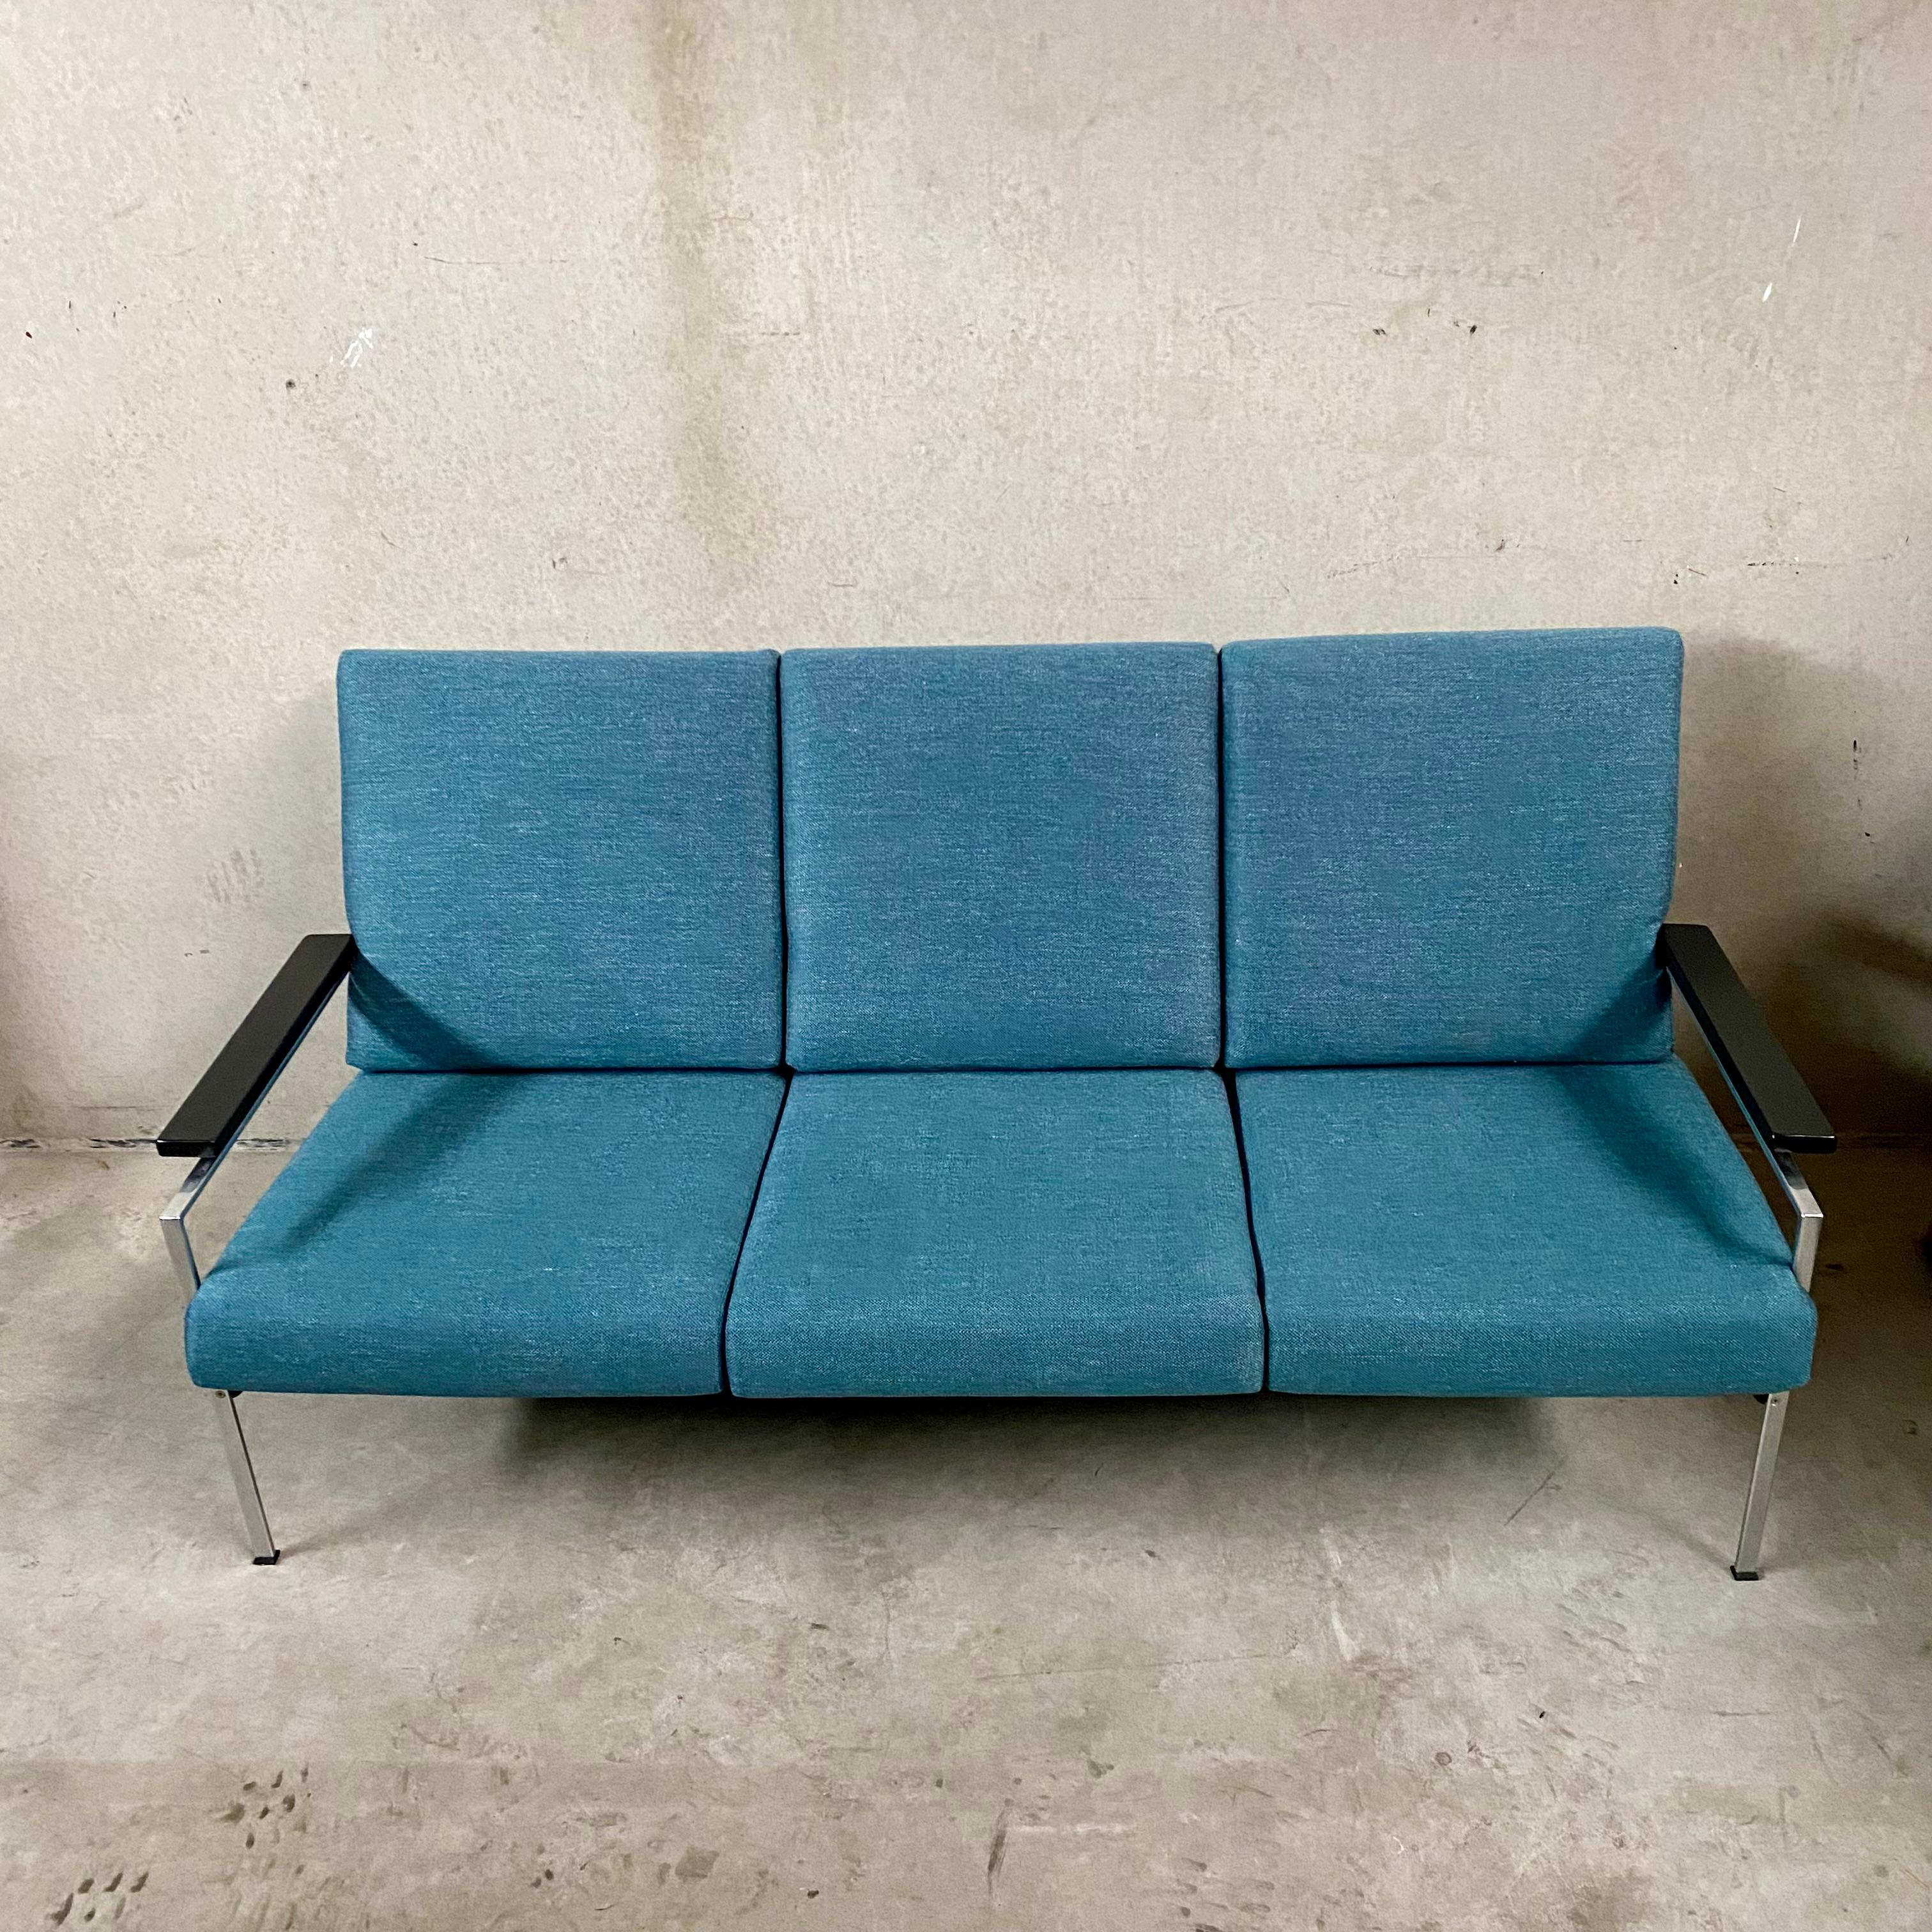 Mid-20th Century 3-seater Sofa by Rob Parry for Gelderland, Netherlands 1970 For Sale